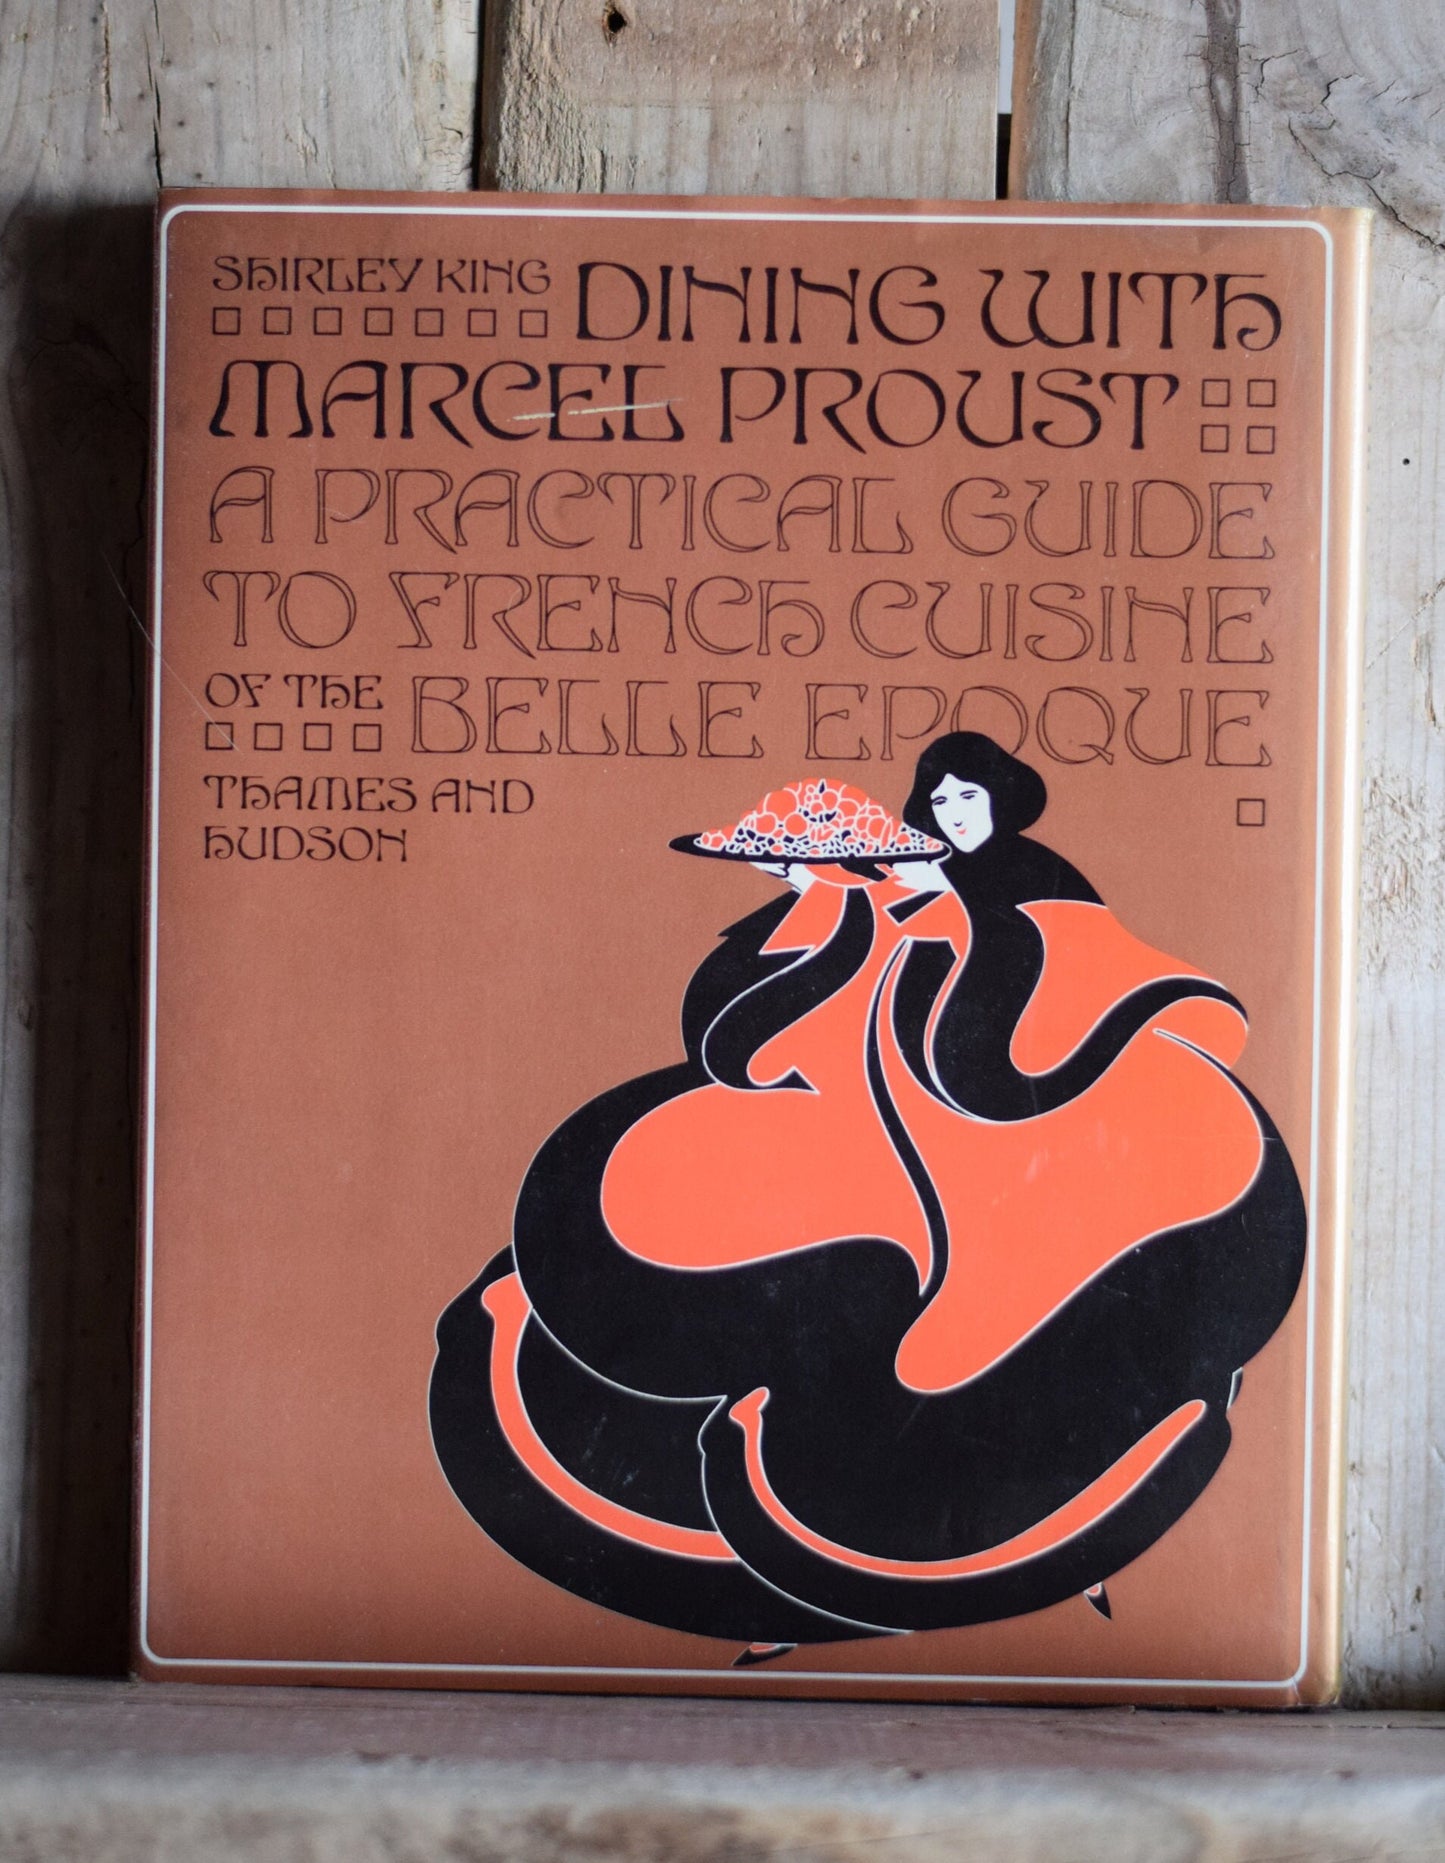 Vintage Cookbook: Shirley King - Dining with Marcel Proust, Foreword by James Beard